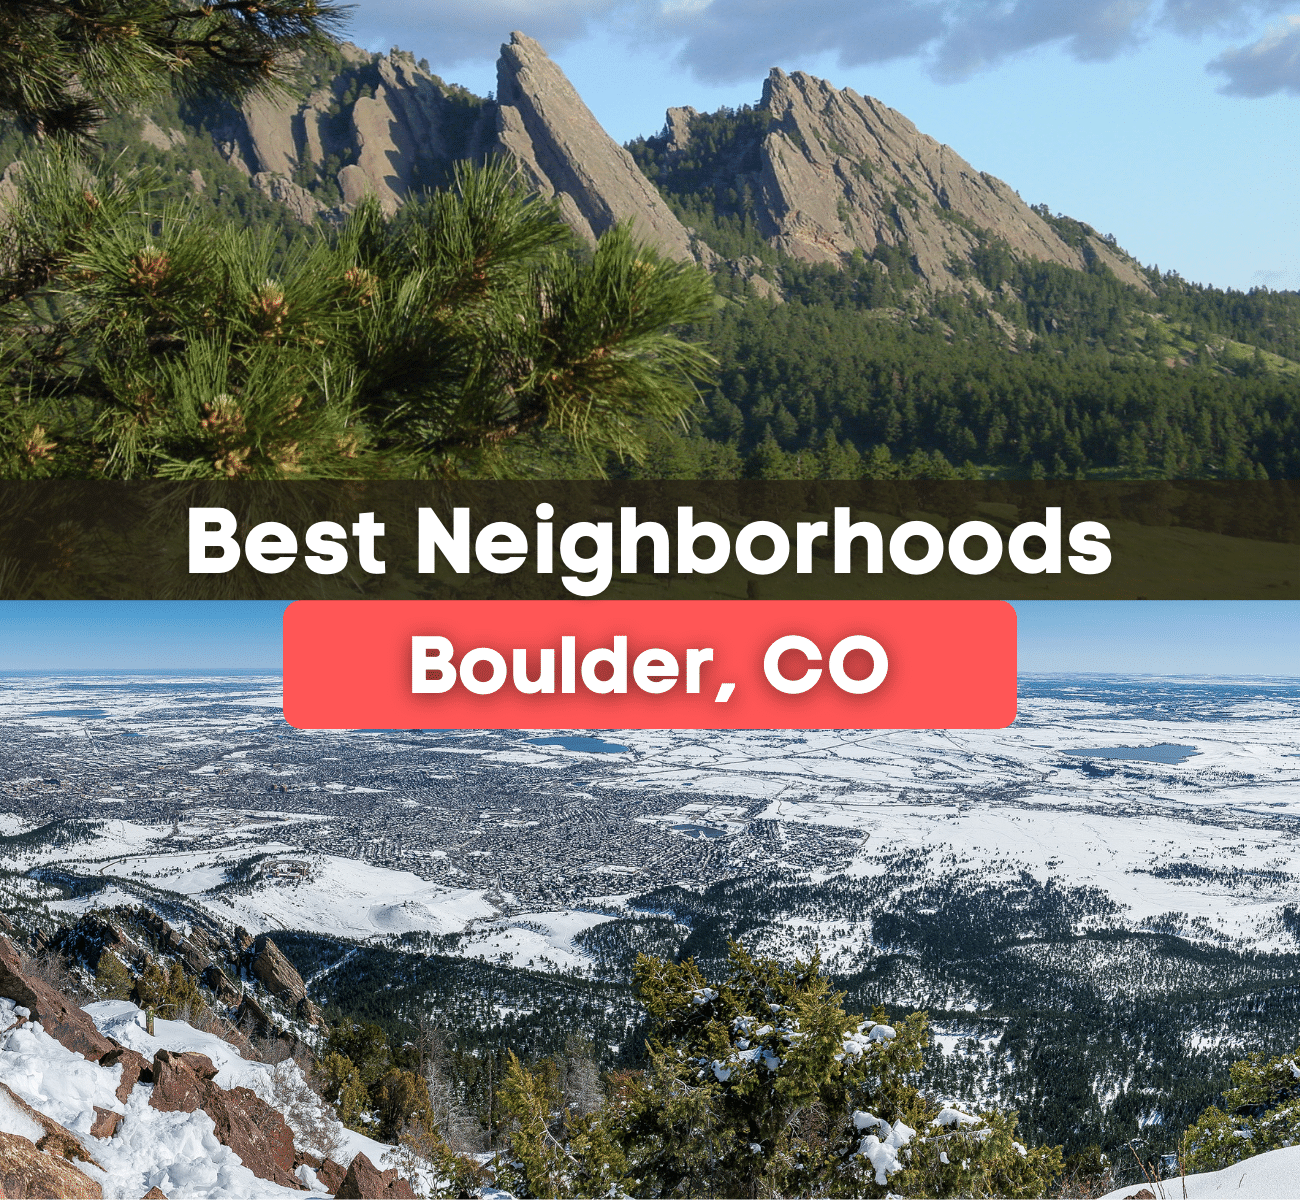 Best Neighborhoods Boulder, CO - Where are the best places to live in Boulder?